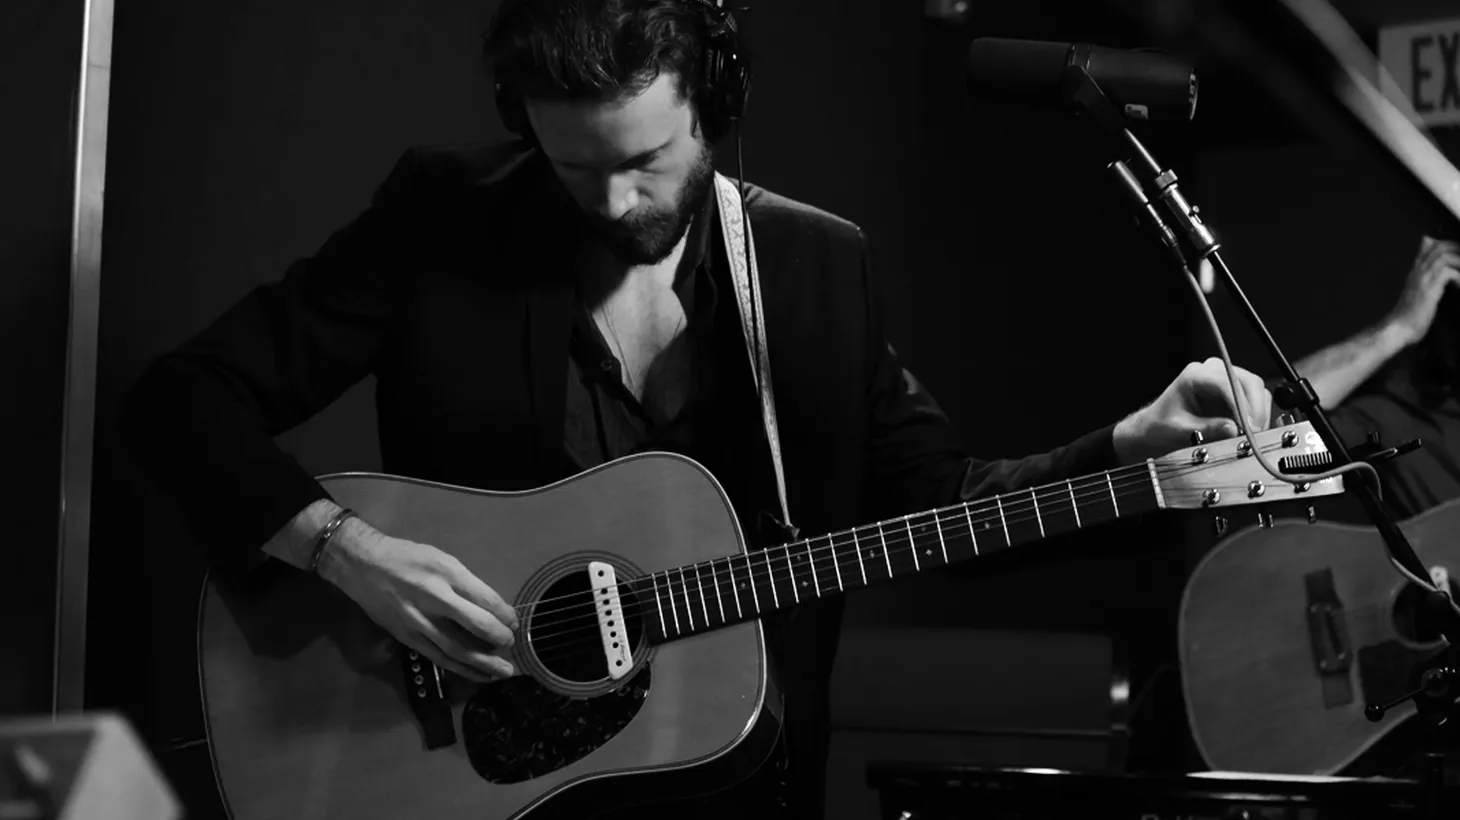 Father John Misty is an intriguing character created by former Fleet Foxes drummer J. Tillman. He took the music world by storm with his 2015 debut and his sophomore album, I Love You, Honeybear, explores married love.